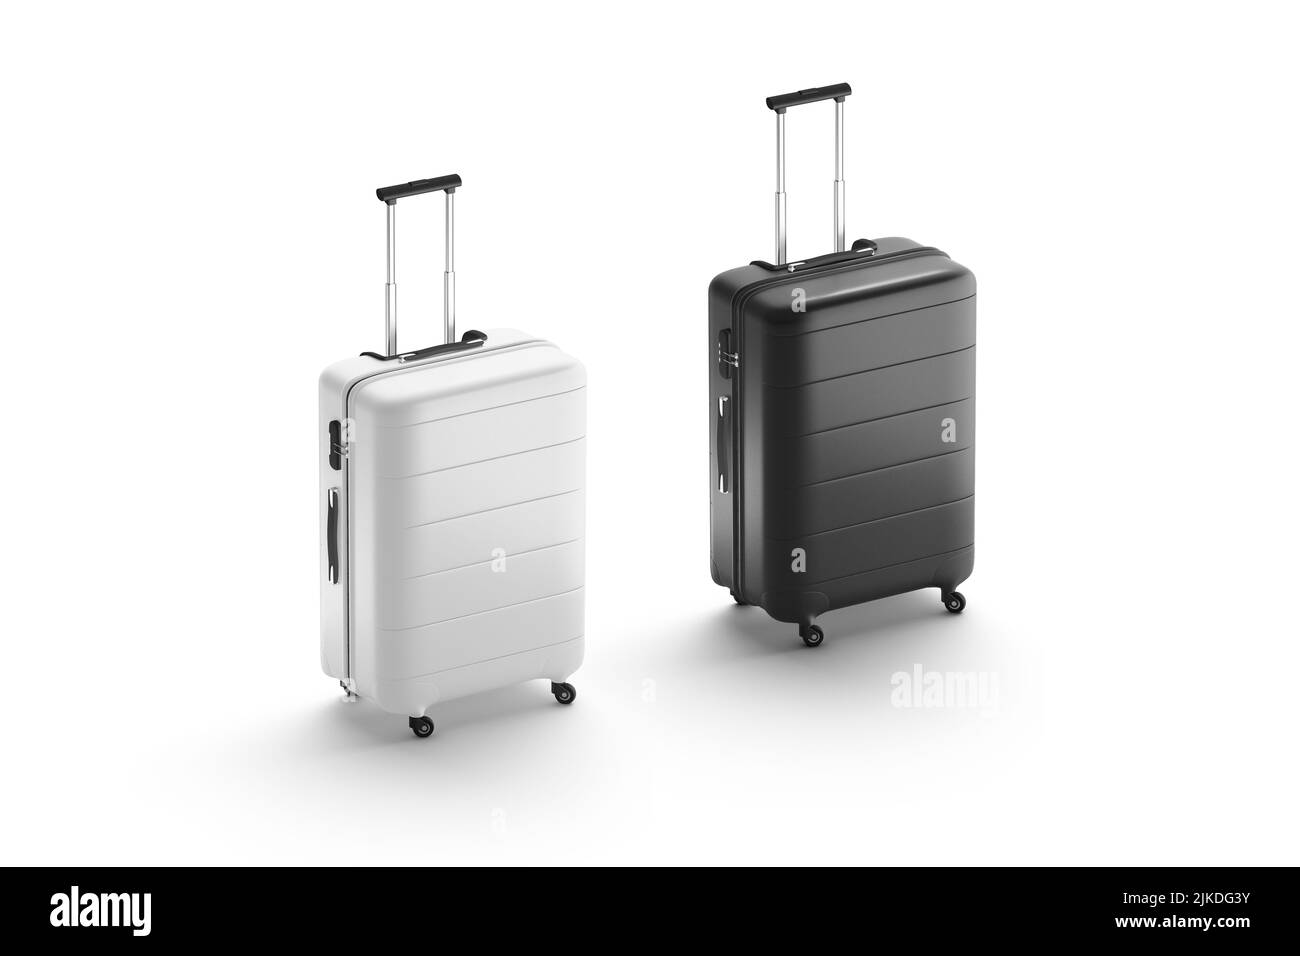 Blank black and white suitcase with handle mockup, side view Stock Photo